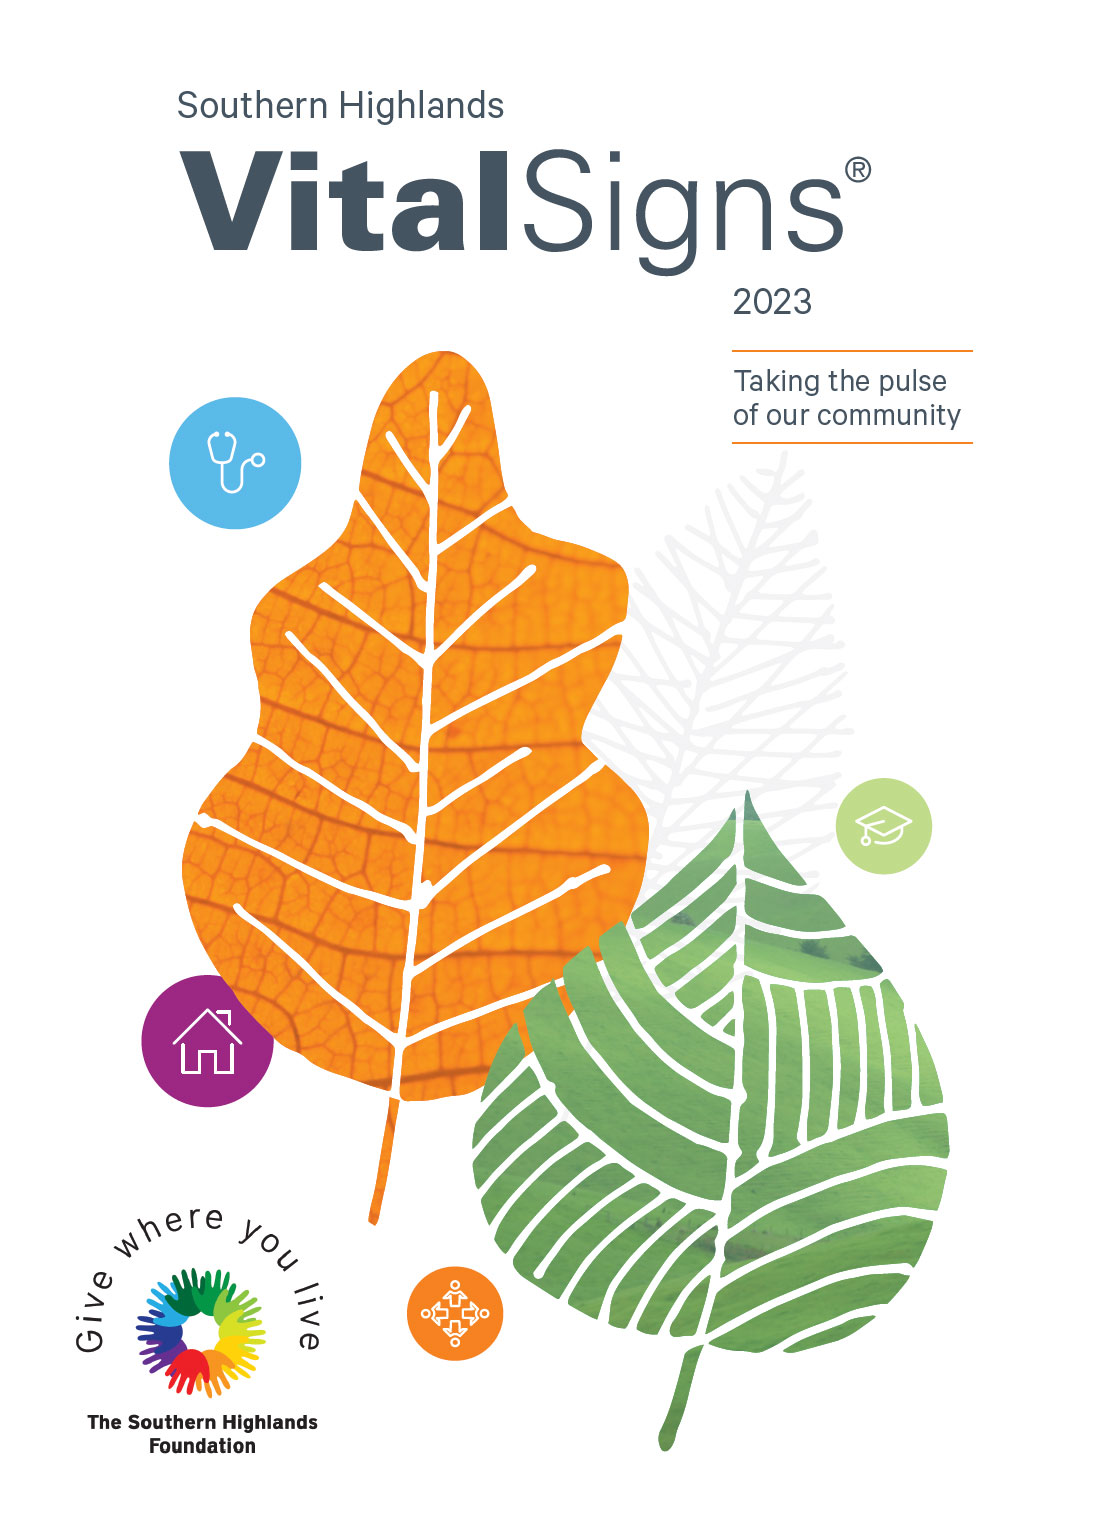 Vital Signs of the Southern Highlands – Research Report released